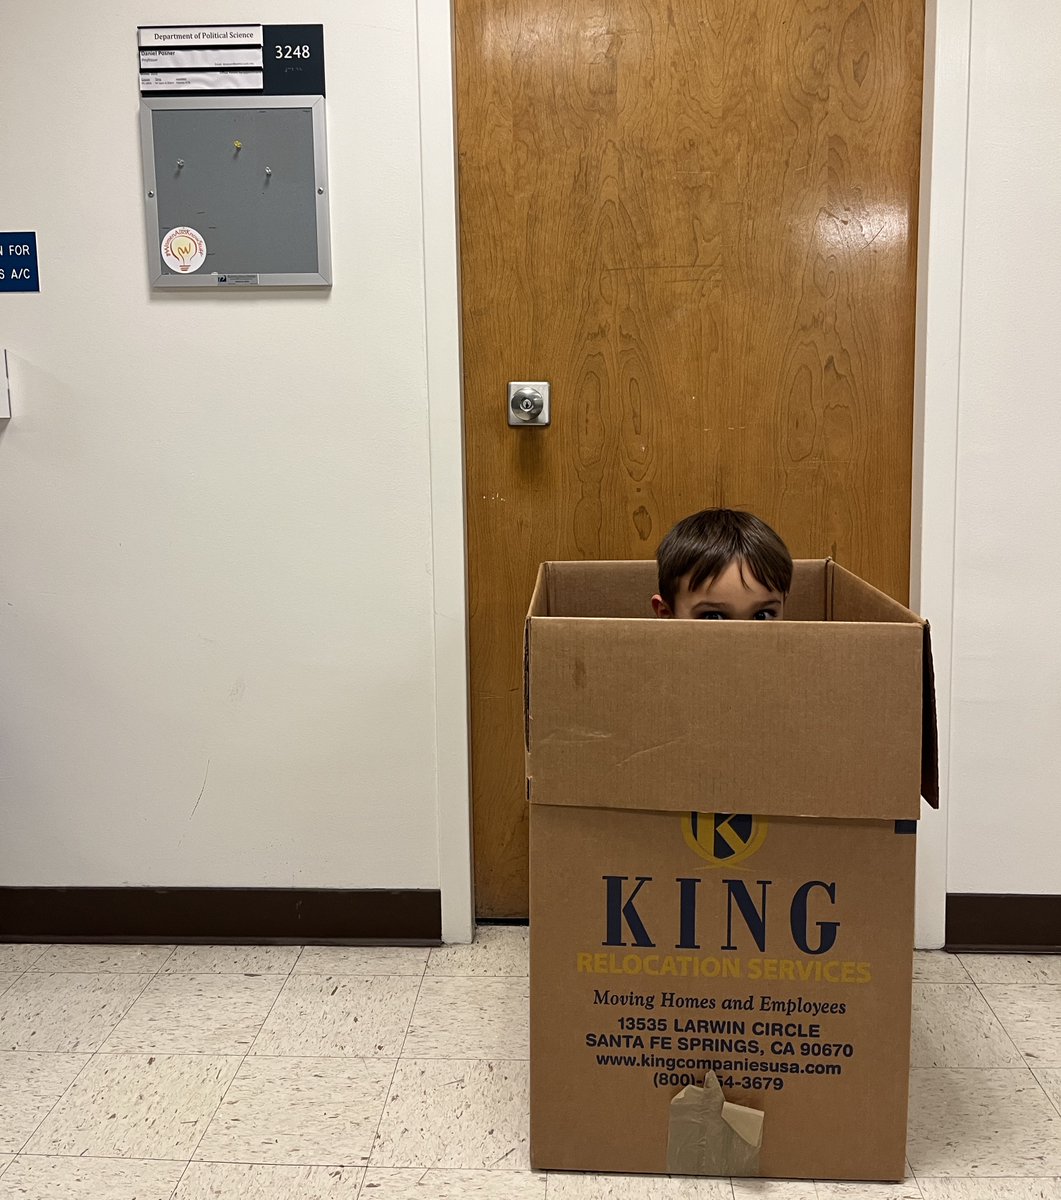 There's a super suspicious package outside of @DanielNPosner's office, should I return to the sender? The box is claiming that it should go to @luwei_ying's office instead, but will settle for either @graemedblair or @EfrenPoliPsy if needed. Pls advise. Box is very heavy.